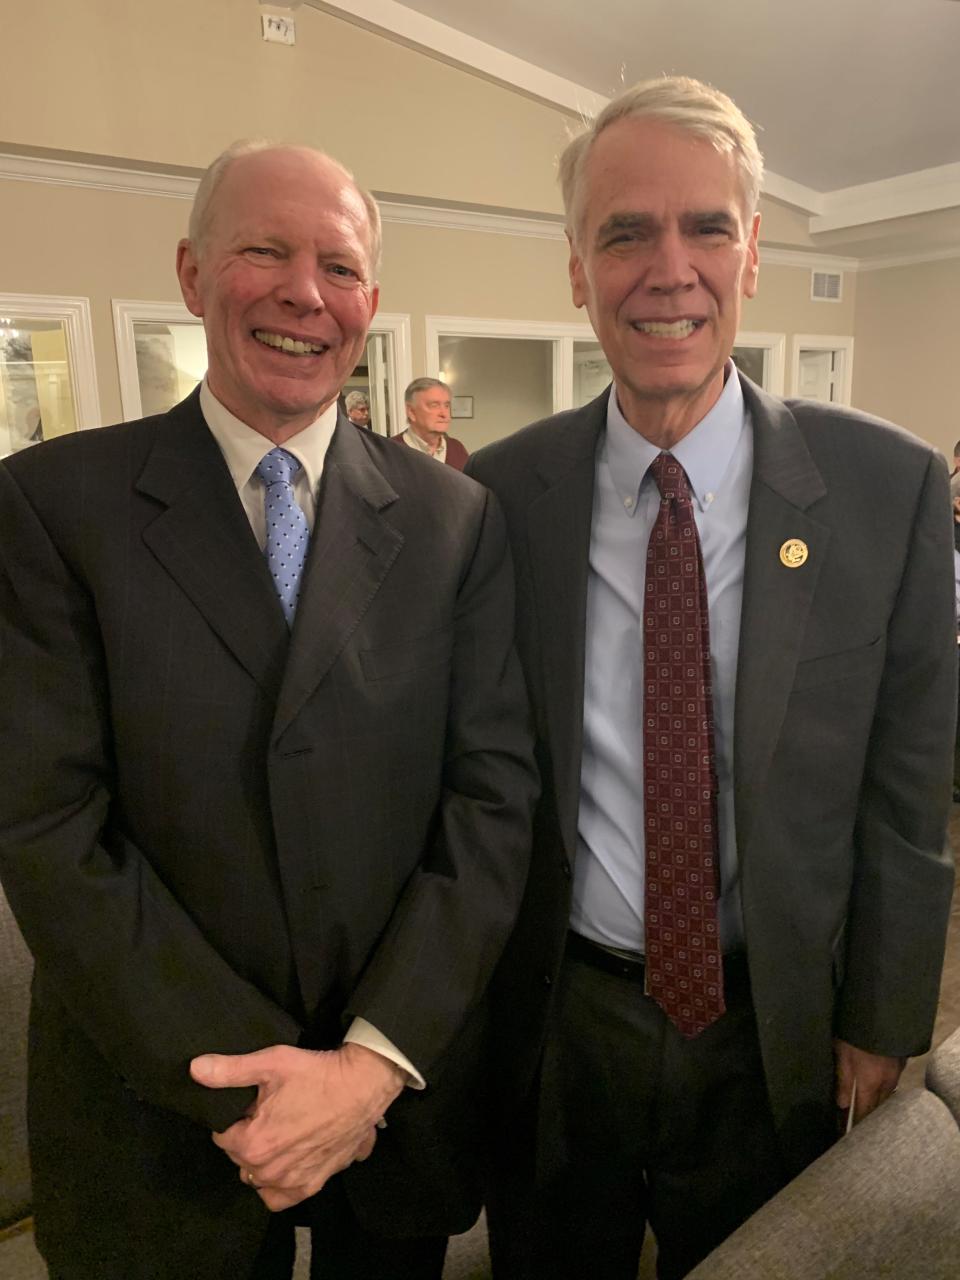 City Law Director Charles Swanson, left, and U.S. District Judge Thomas Varlan pause for a photo while attending the funeral of former city fire chief Bruce Cureton on March 19.